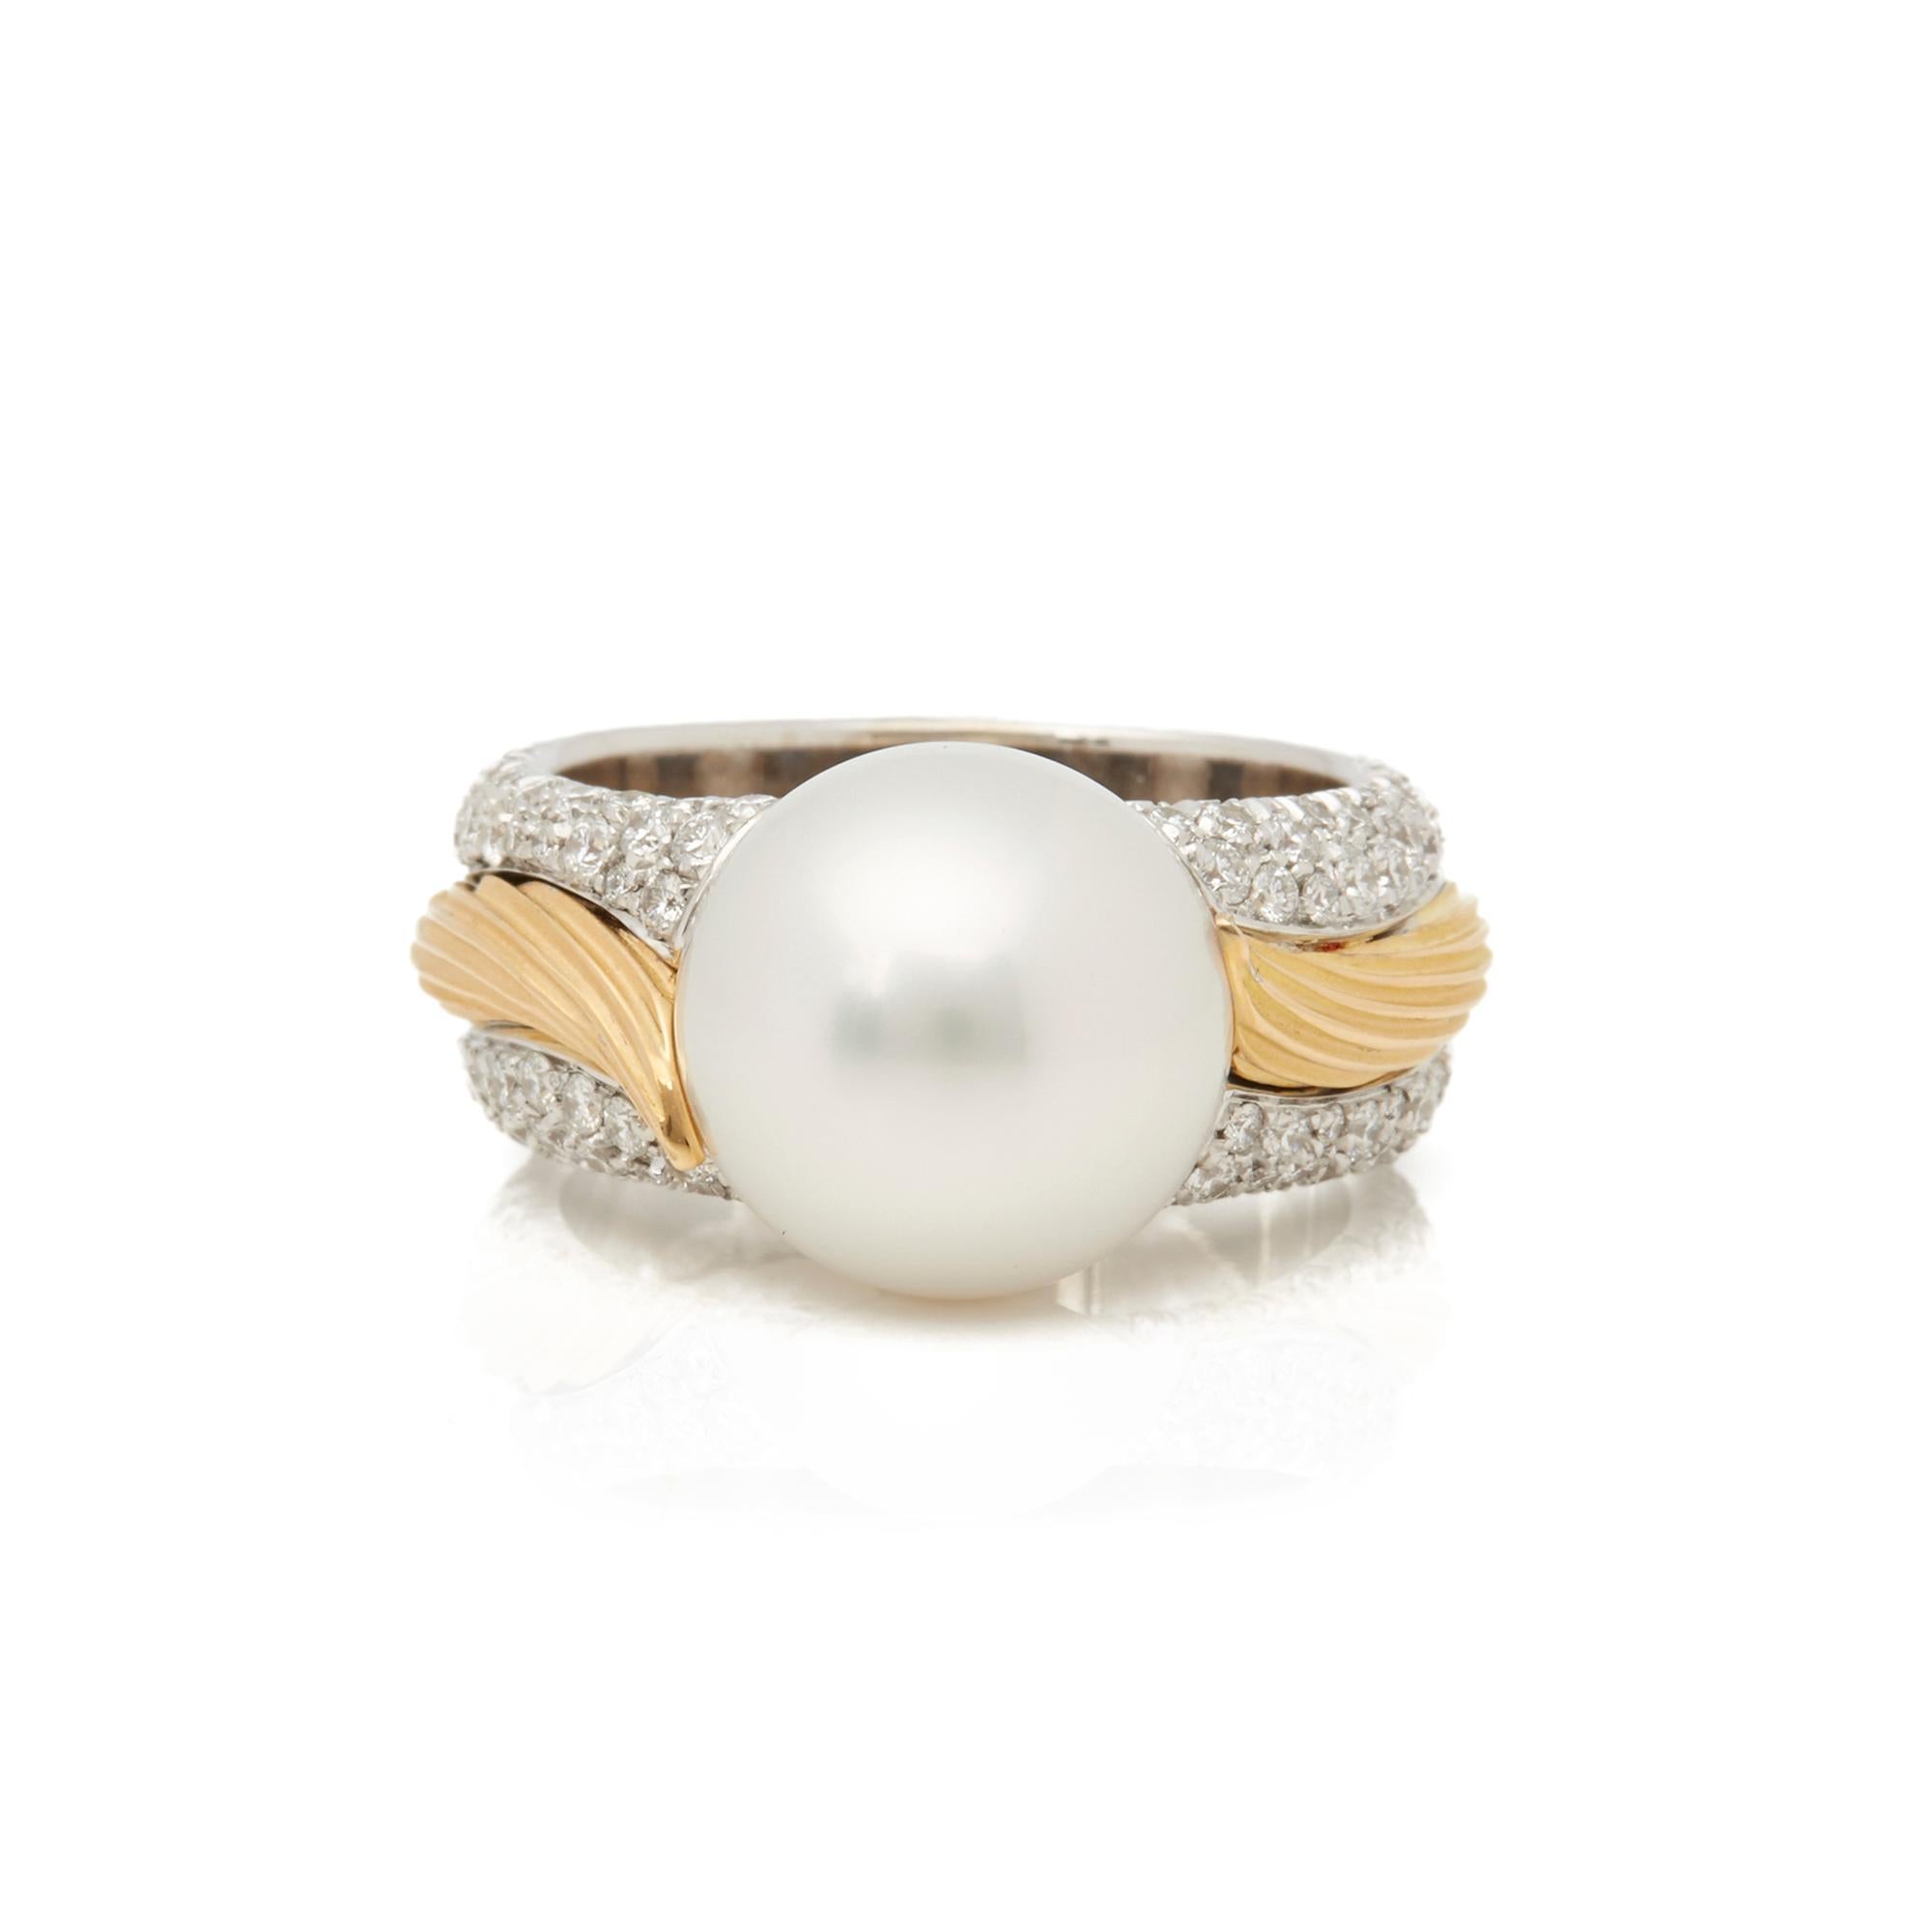 Code: COM2120
Brand: Mikimoto
Description: 18k White & Yellow Gold Akoya Pearl & Diamond Cocktail Ring
Accompanied With: Box & Certificate
Gender: Ladies
UK Ring Size: K 1/2
EU Ring Size: 56
US Ring Size: 7 1/4
Resizing Possible?: NO
Band Width: